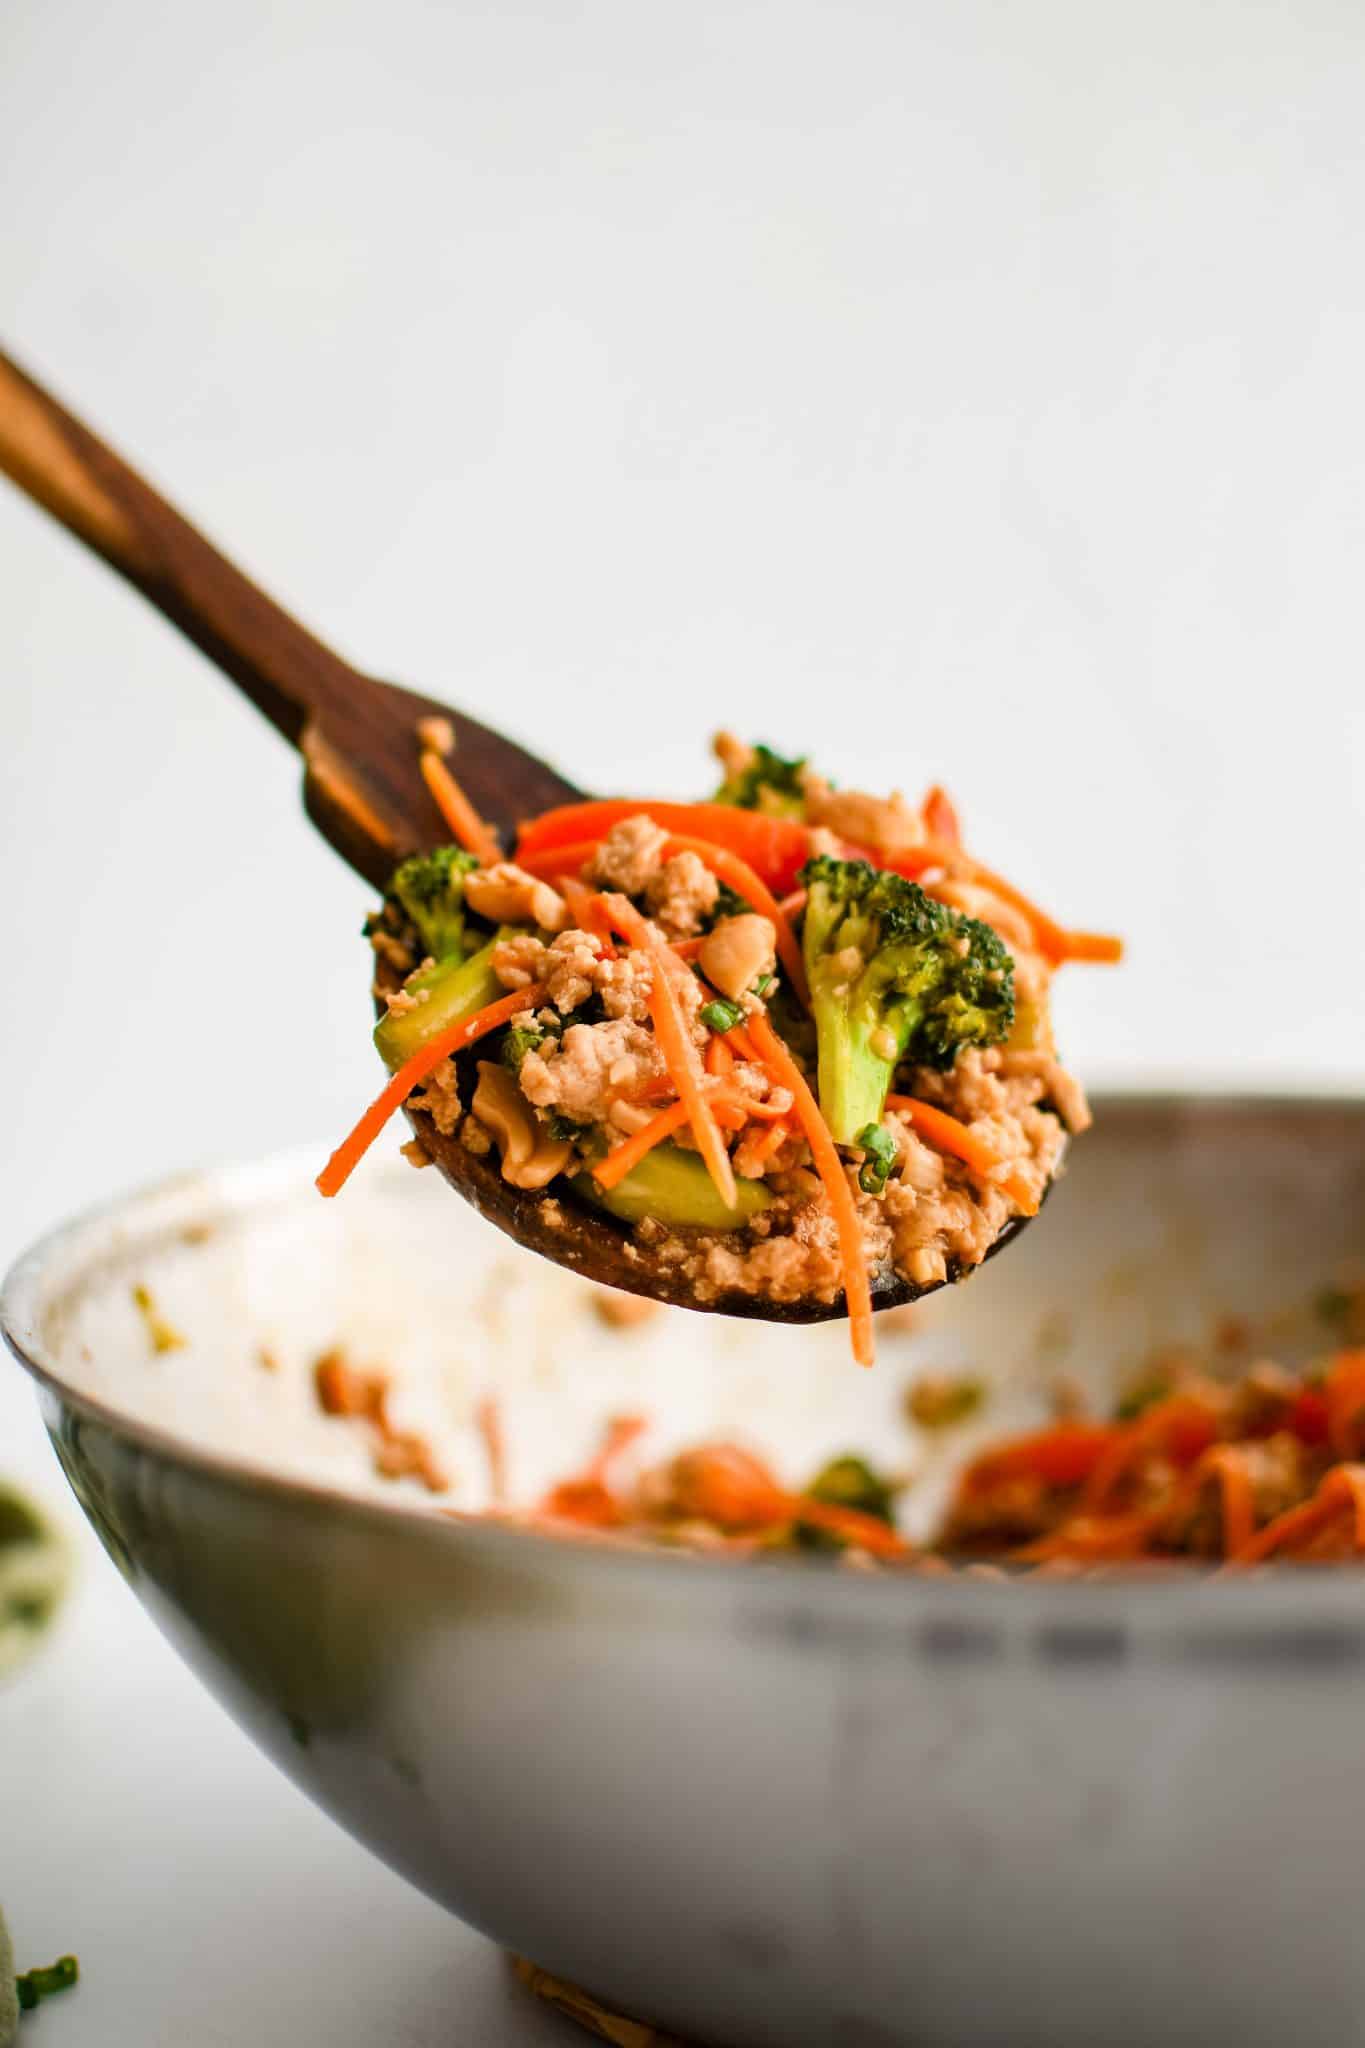 A large wooden serving spoon filled with ground chicken stir fry.